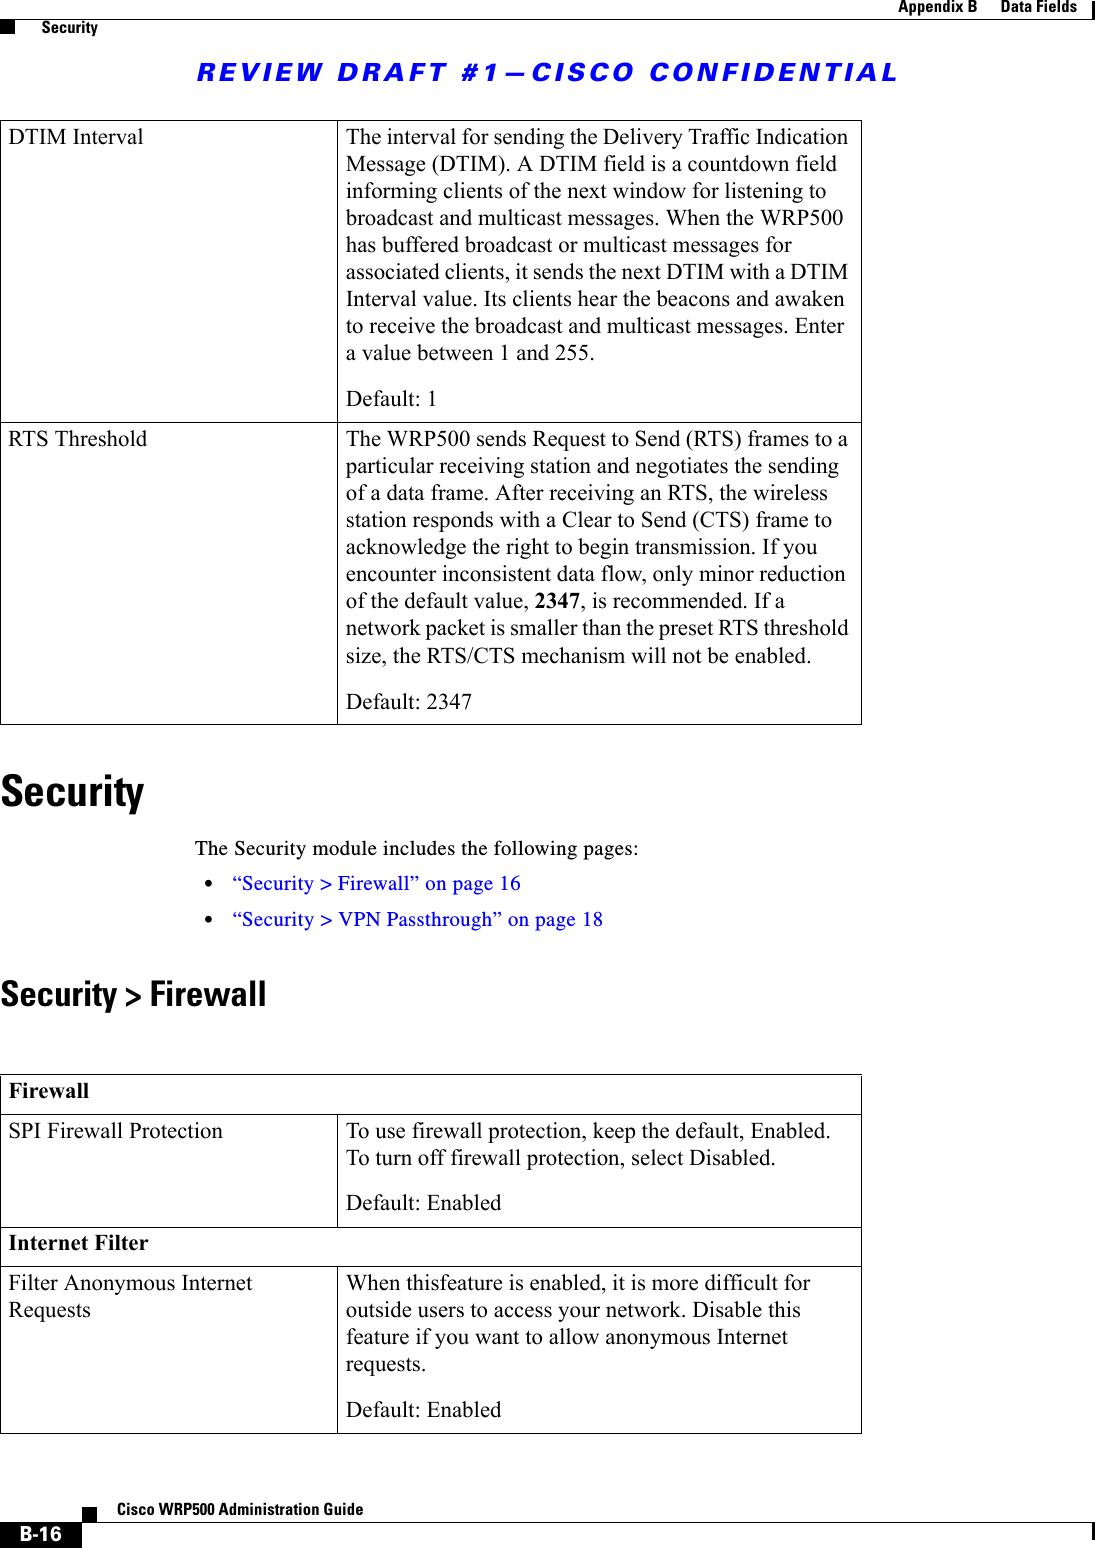 REVIEW DRAFT #1—CISCO CONFIDENTIALB-16Cisco WRP500 Administration Guide Appendix B      Data Fields  SecuritySecurityThe Security module includes the following pages:•“Security &gt; Firewall” on page 16•“Security &gt; VPN Passthrough” on page 18Security &gt; FirewallDTIM Interval The interval for sending the Delivery Traffic Indication Message (DTIM). A DTIM field is a countdown field informing clients of the next window for listening to broadcast and multicast messages. When the WRP500 has buffered broadcast or multicast messages for associated clients, it sends the next DTIM with a DTIM Interval value. Its clients hear the beacons and awaken to receive the broadcast and multicast messages. Enter a value between 1 and 255.Default: 1RTS Threshold The WRP500 sends Request to Send (RTS) frames to a particular receiving station and negotiates the sending of a data frame. After receiving an RTS, the wireless station responds with a Clear to Send (CTS) frame to acknowledge the right to begin transmission. If you encounter inconsistent data flow, only minor reduction of the default value, 2347, is recommended. If a network packet is smaller than the preset RTS threshold size, the RTS/CTS mechanism will not be enabled. Default: 2347FirewallSPI Firewall Protection To use firewall protection, keep the default, Enabled. To turn off firewall protection, select Disabled.Default: EnabledInternet FilterFilter Anonymous Internet RequestsWhen thisfeature is enabled, it is more difficult for outside users to access your network. Disable this feature if you want to allow anonymous Internet requests.Default: Enabled